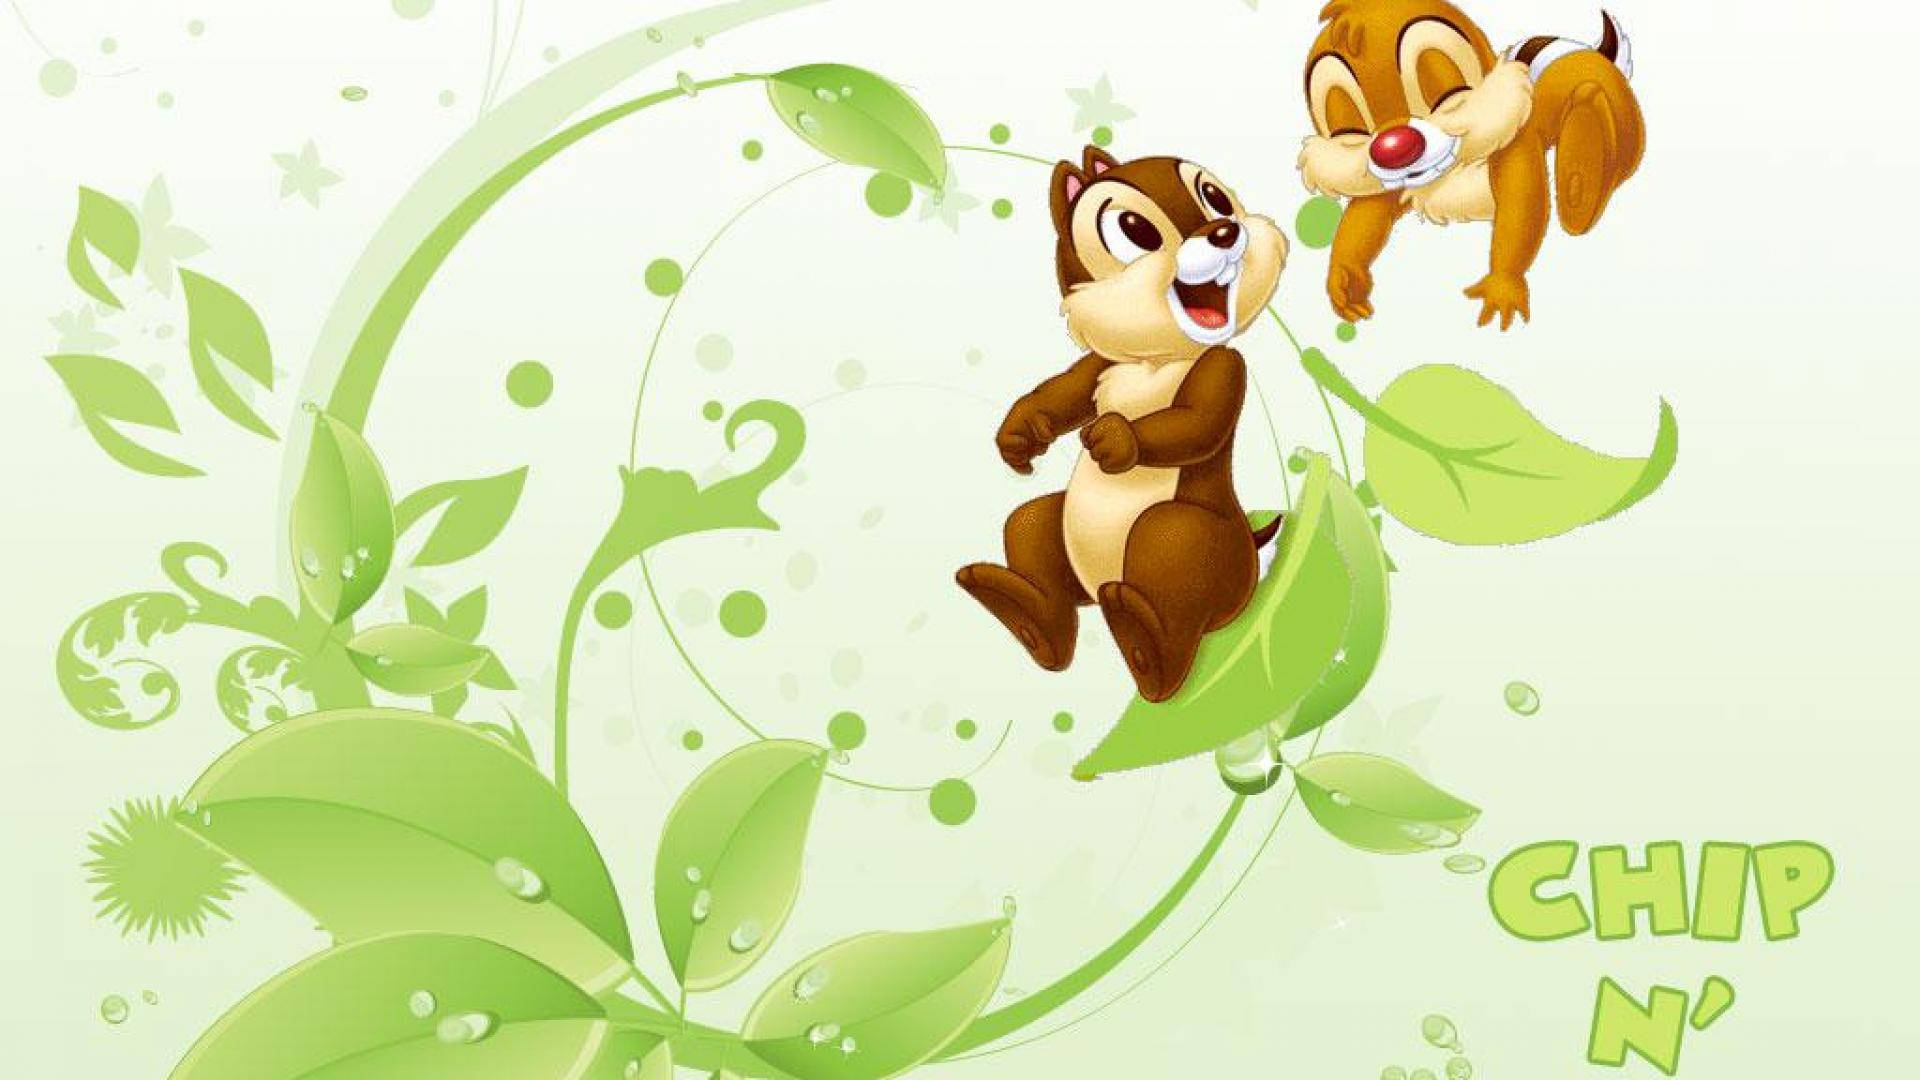 Chip N Dale In Nature Background